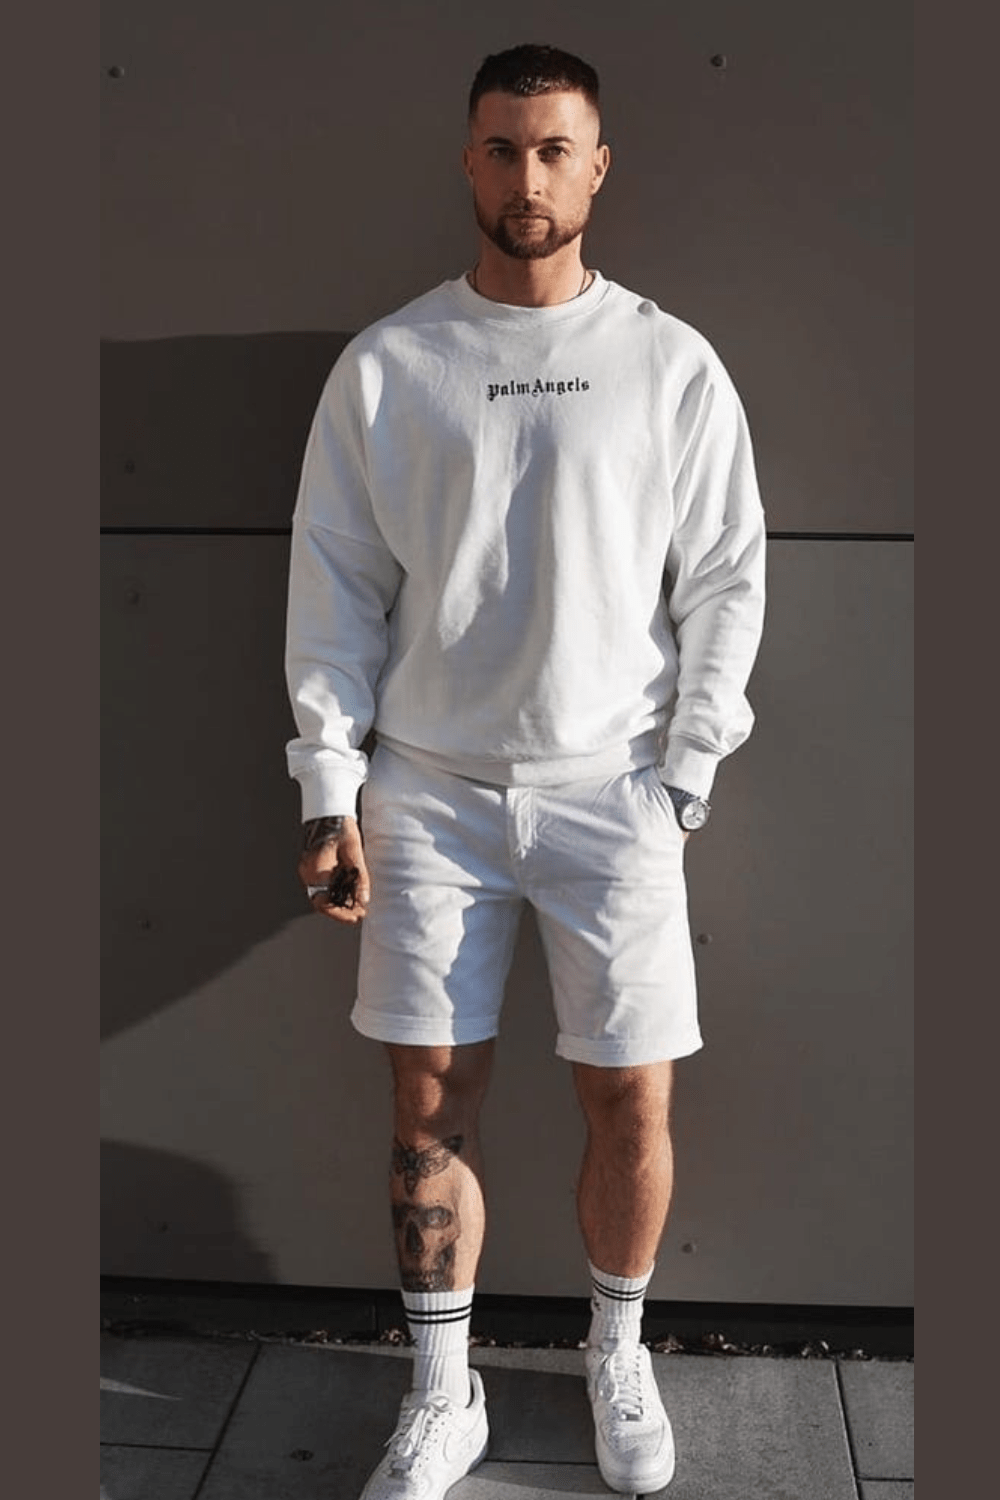 male posing for all white mens outfit with white palm angels brand sweatshirt and white shorts. all white summer outfit